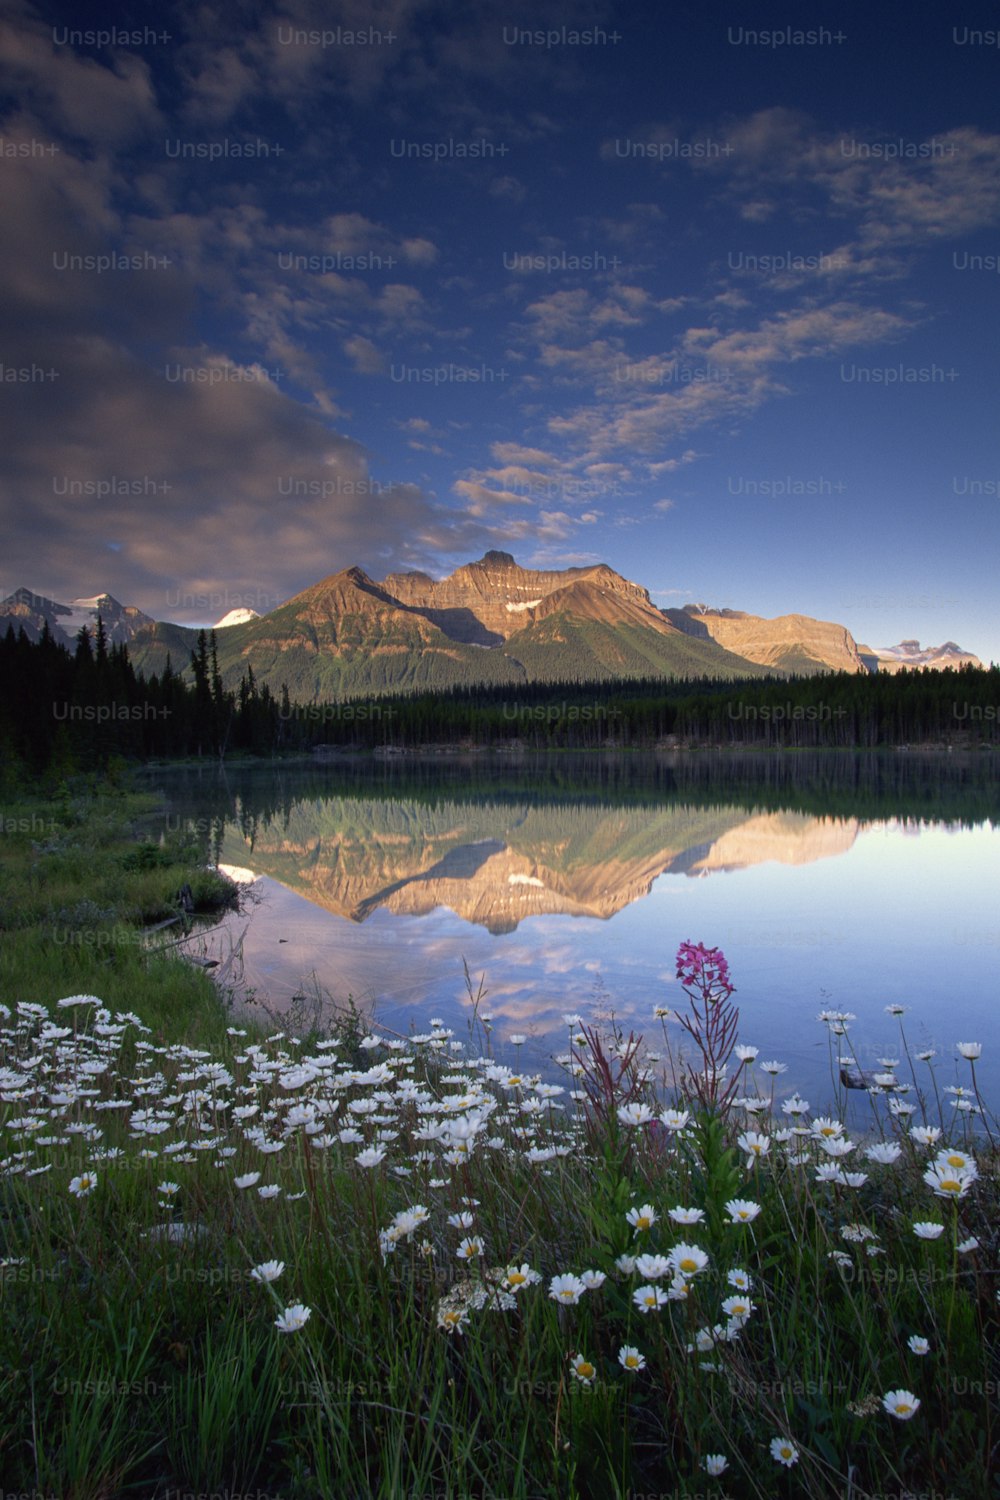 a lake surrounded by grass and flowers with a mountain in the background